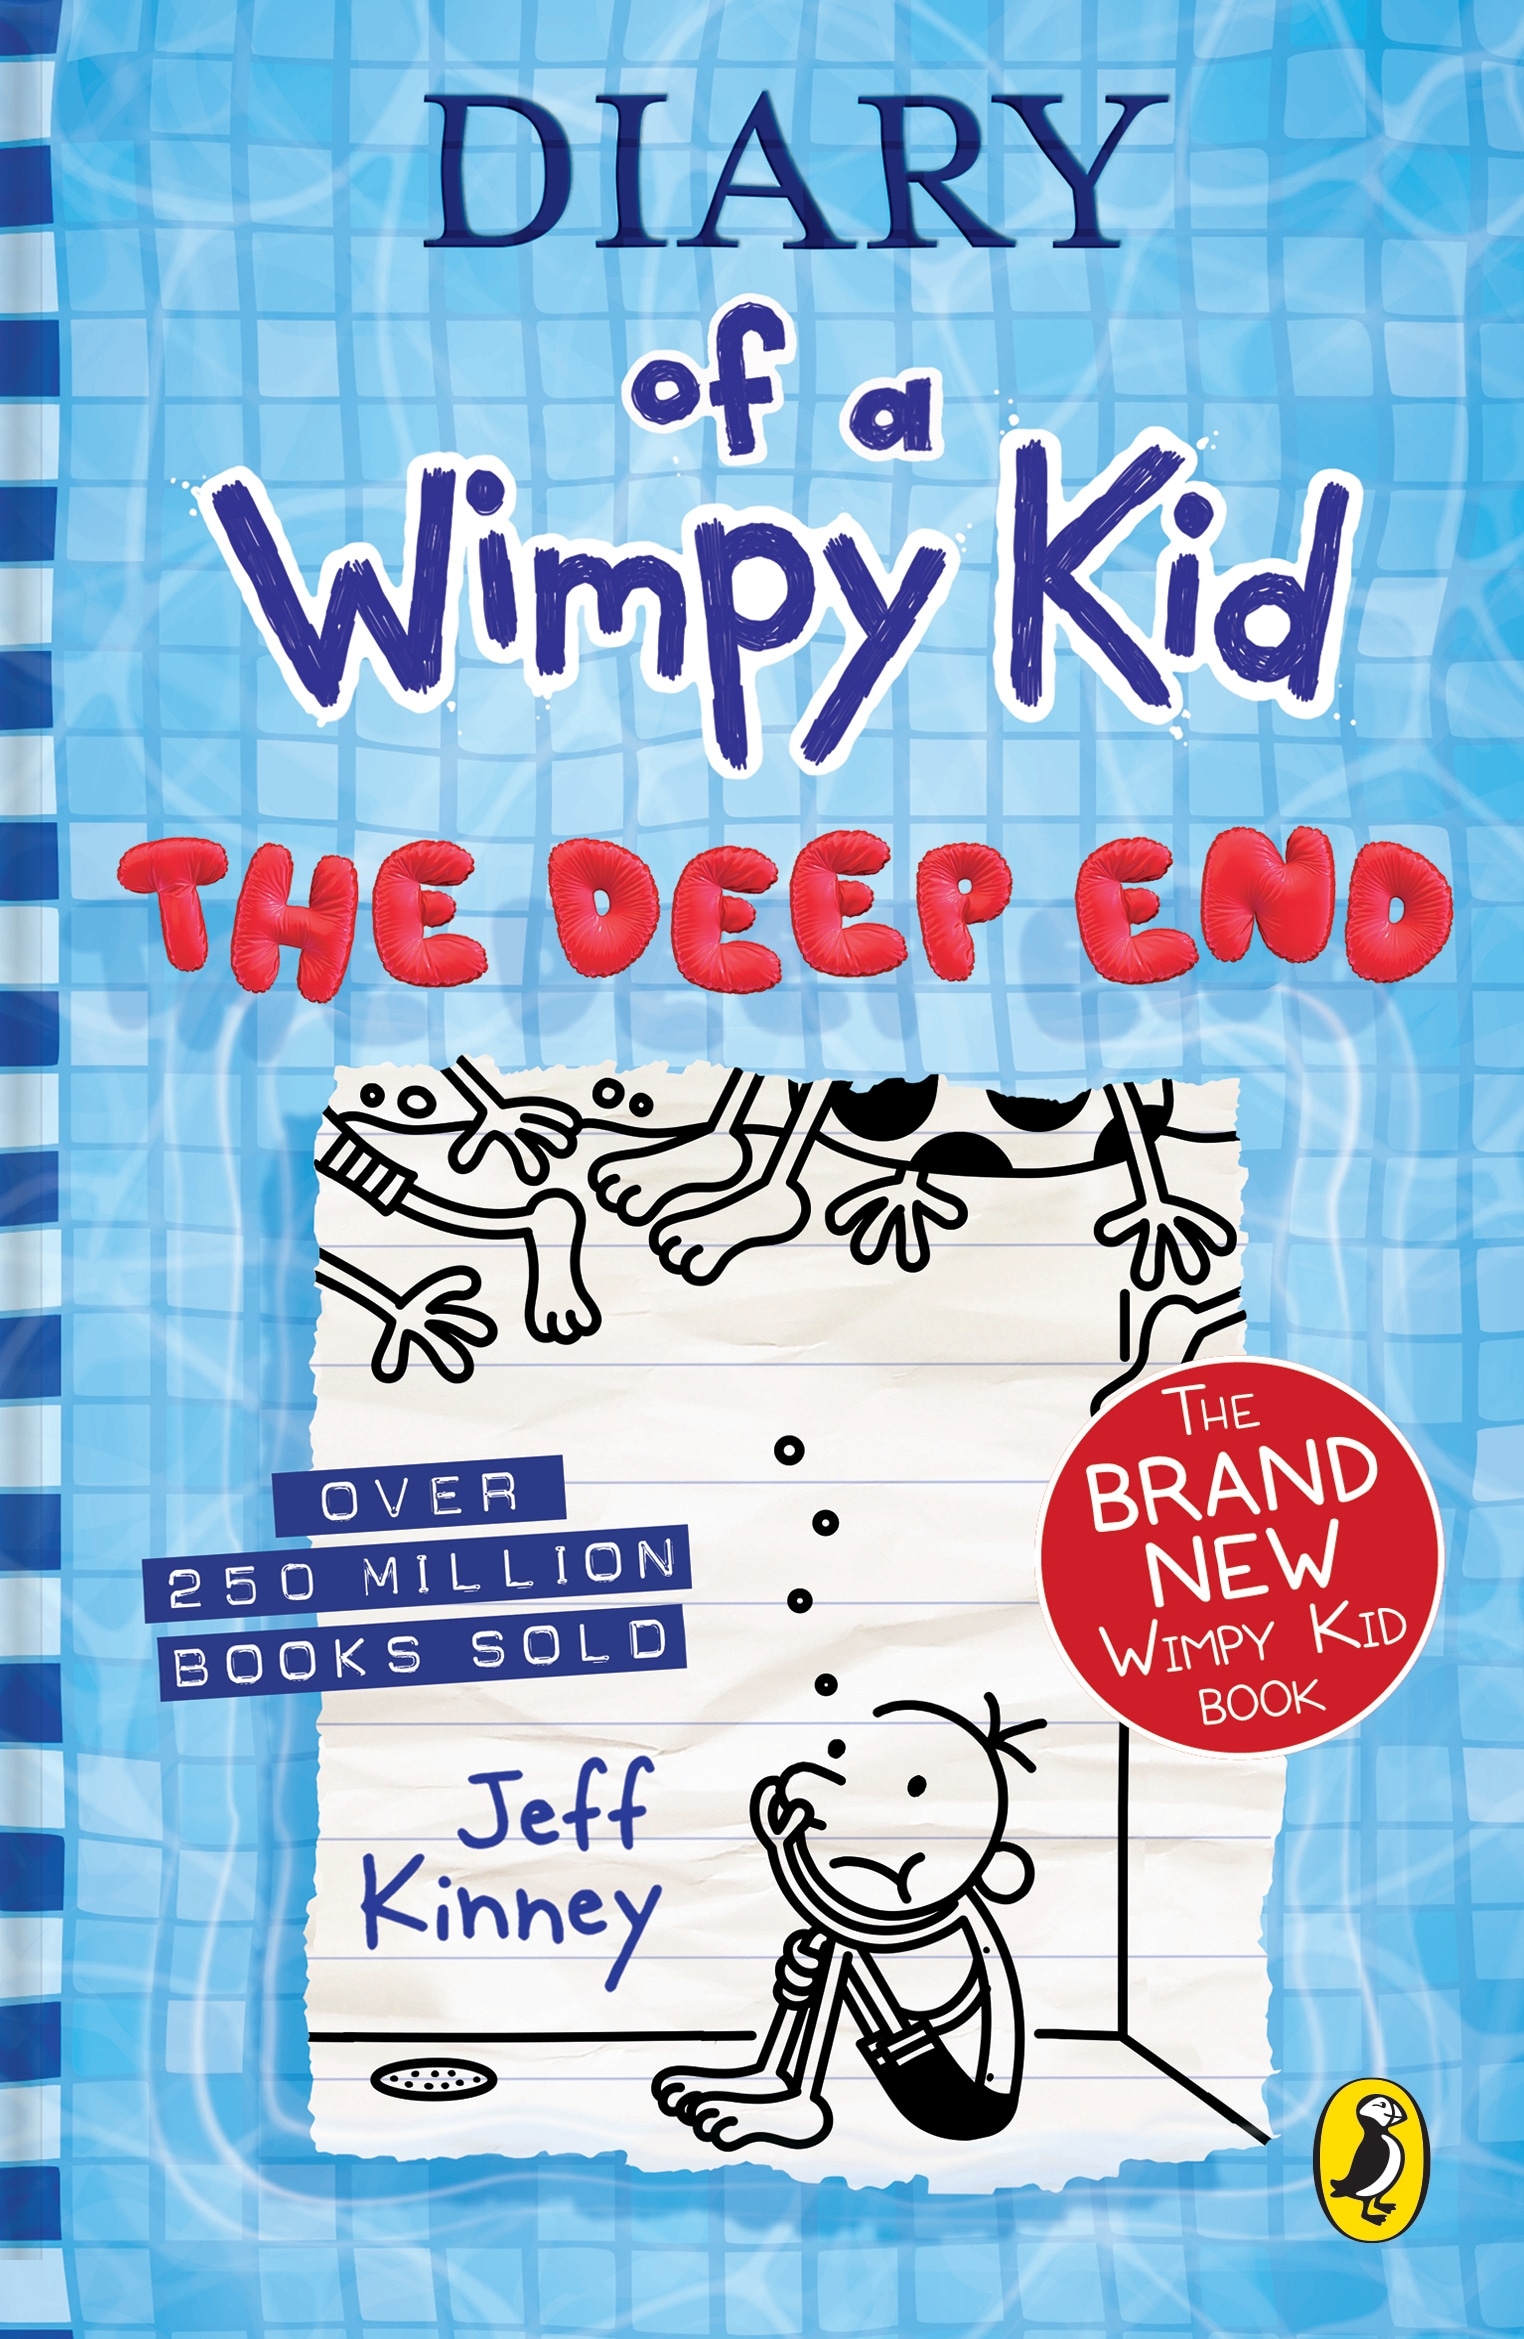 Book “Diary of a Wimpy Kid: The Deep End (Book 15)” by Jeff Kinney — October 27, 2020